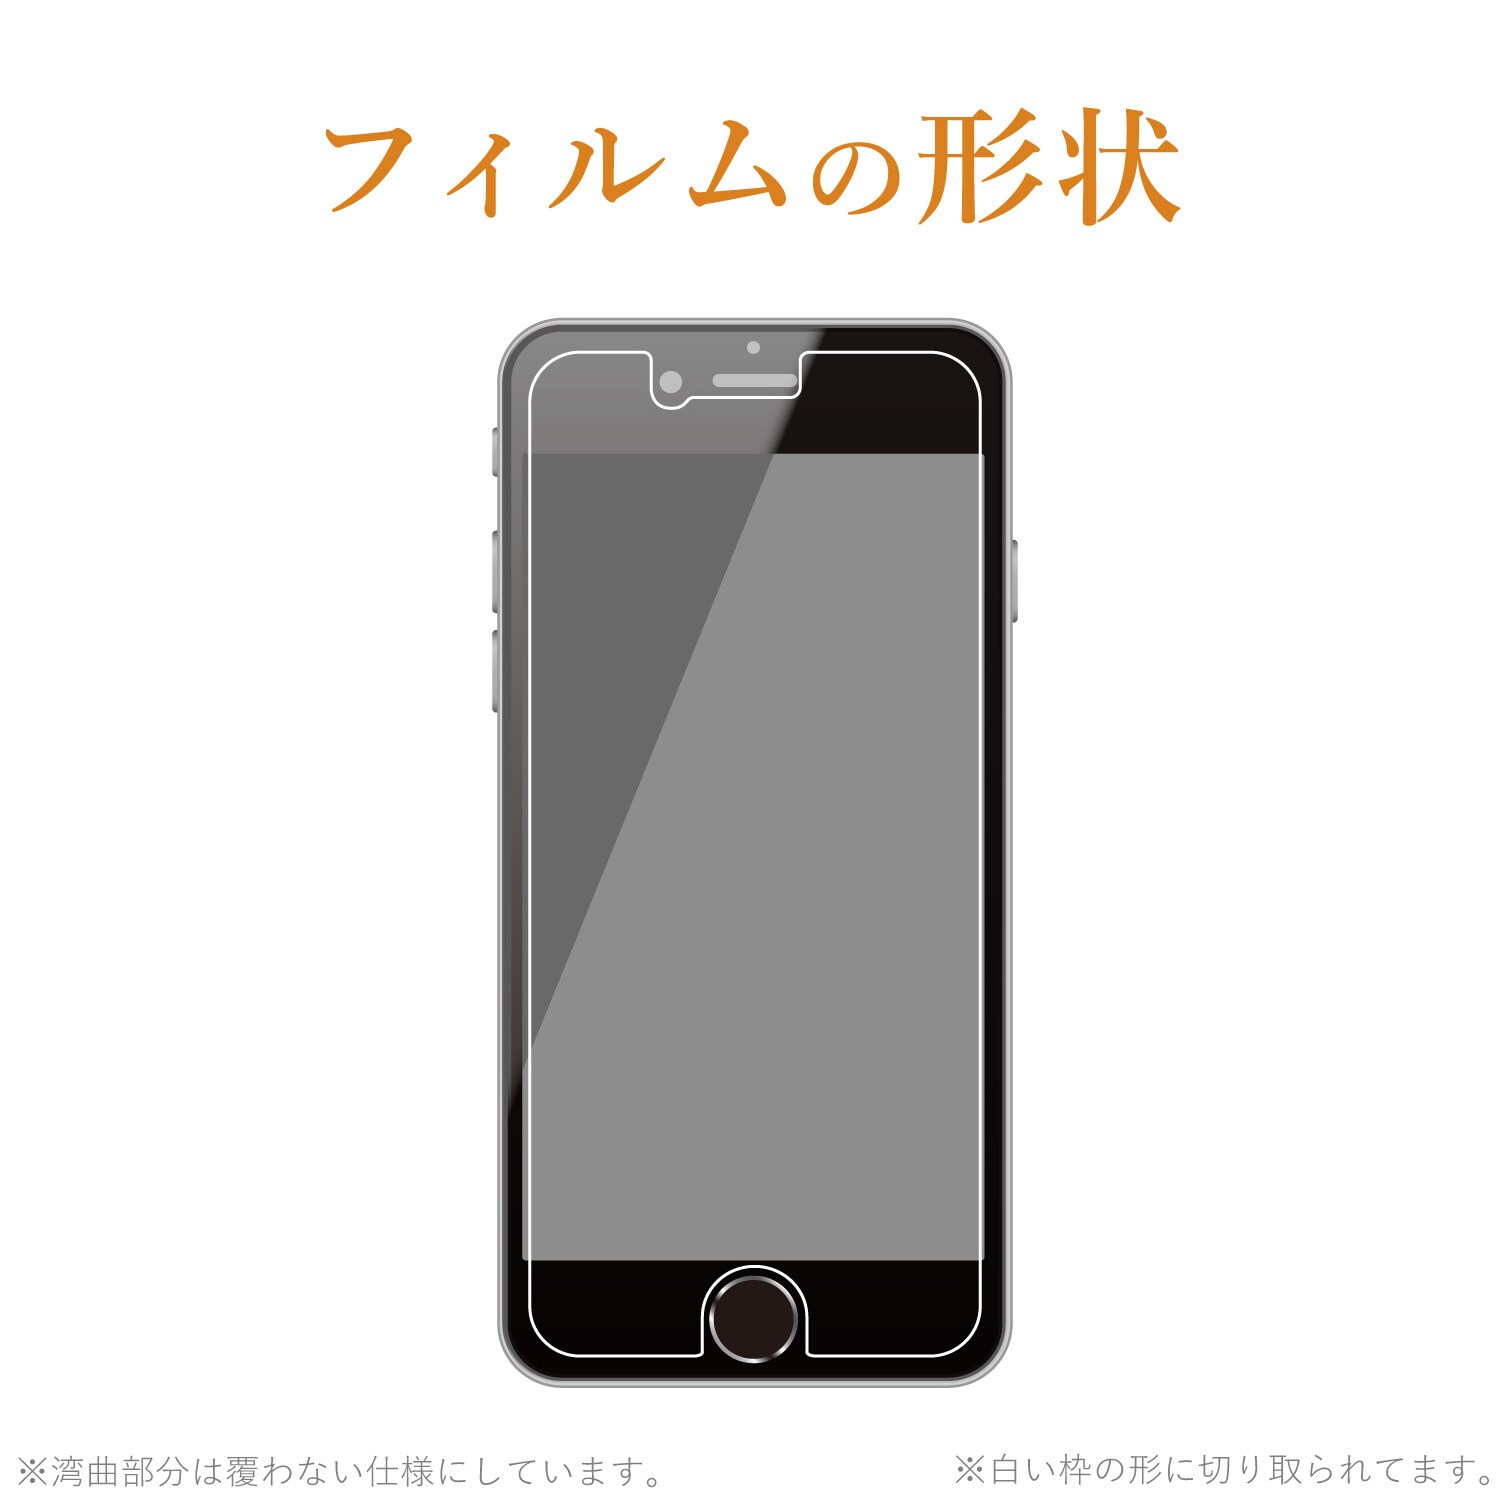 Iphonese 第2世代 Iphone8 評価 Iphone7 Iphone6s Iphone6 フィルム エアレス Iphone 第2世代 Pm A19aflpf Se 耐衝撃